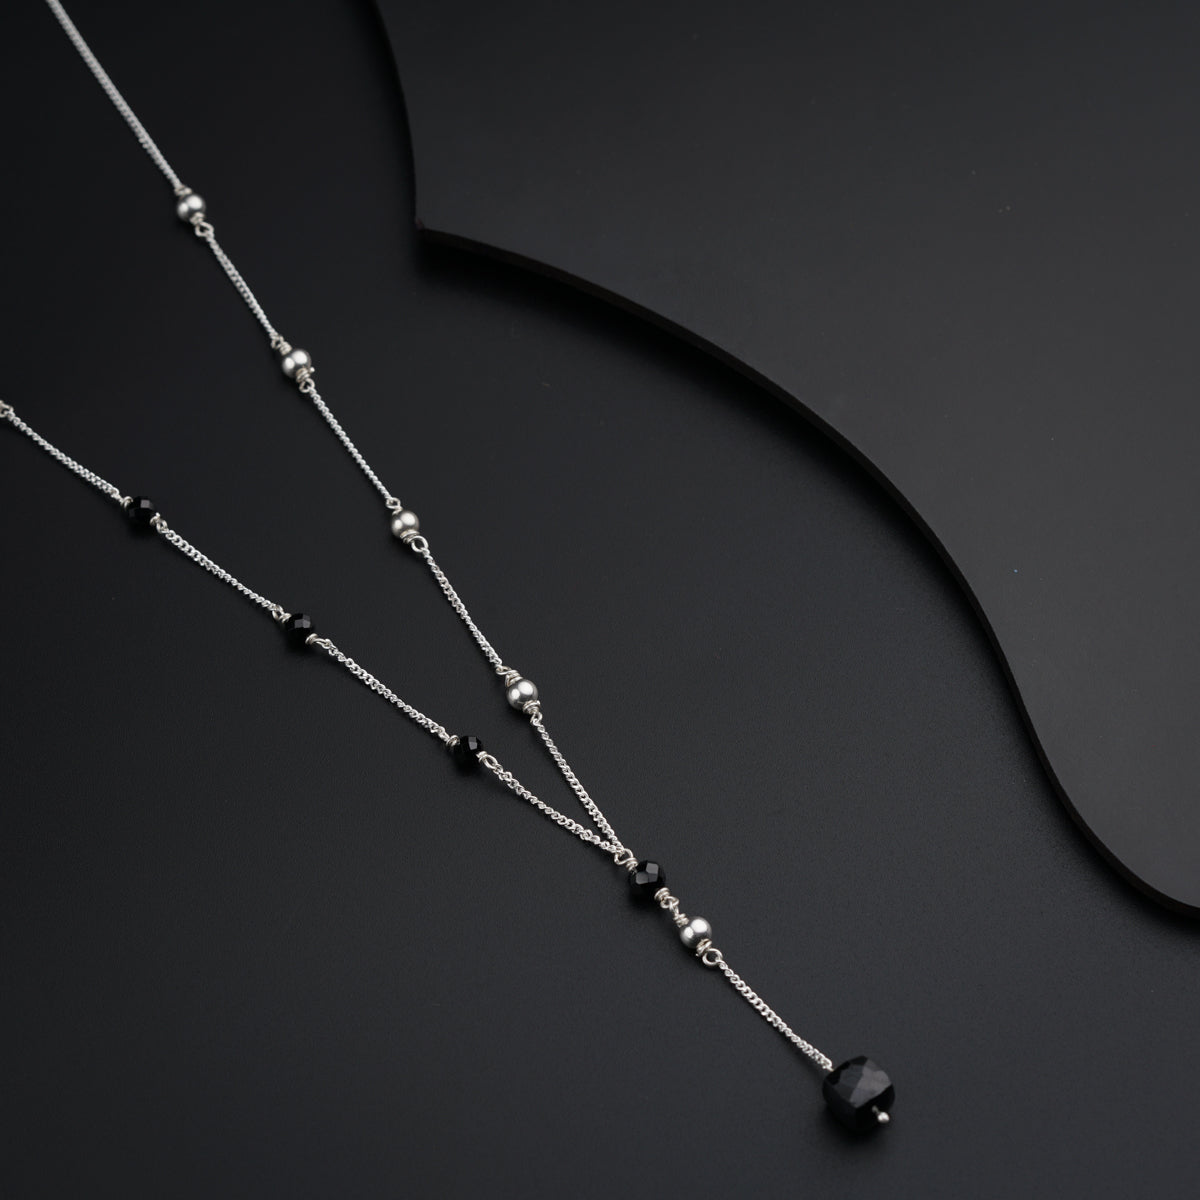 a black and silver necklace on a black background